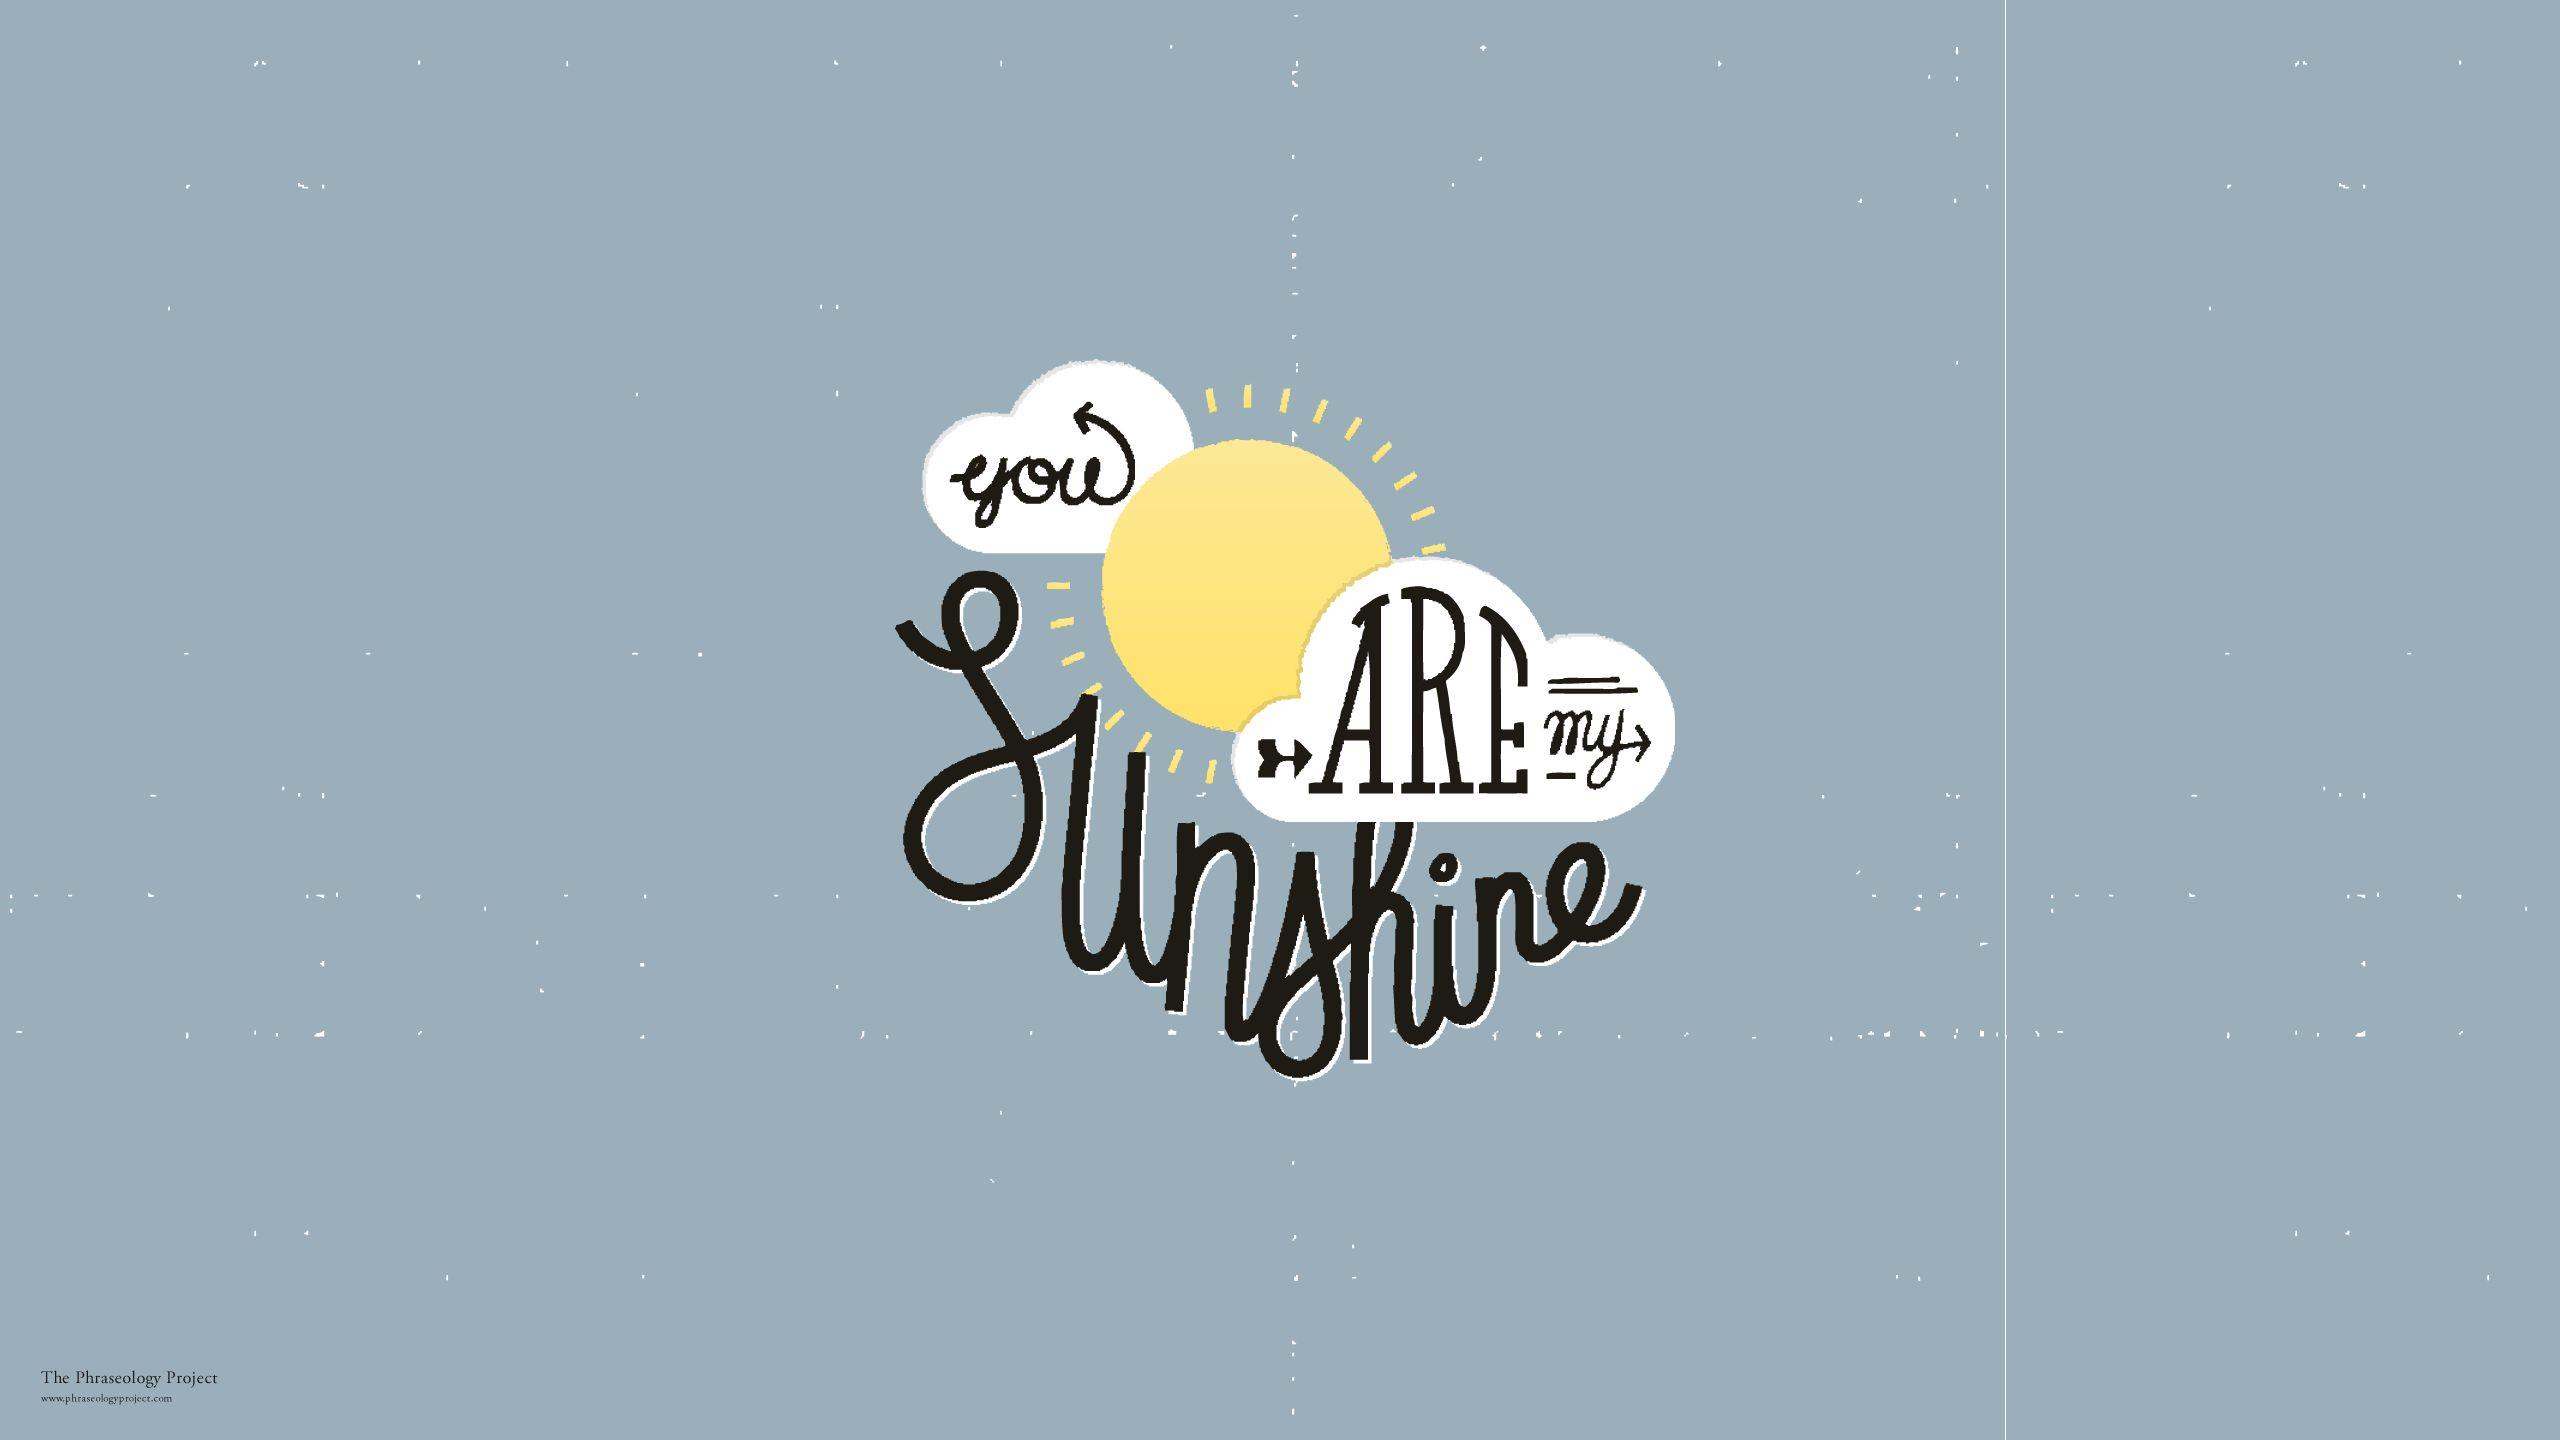 My Sunshine Wallpapers Top Free My Sunshine Backgrounds